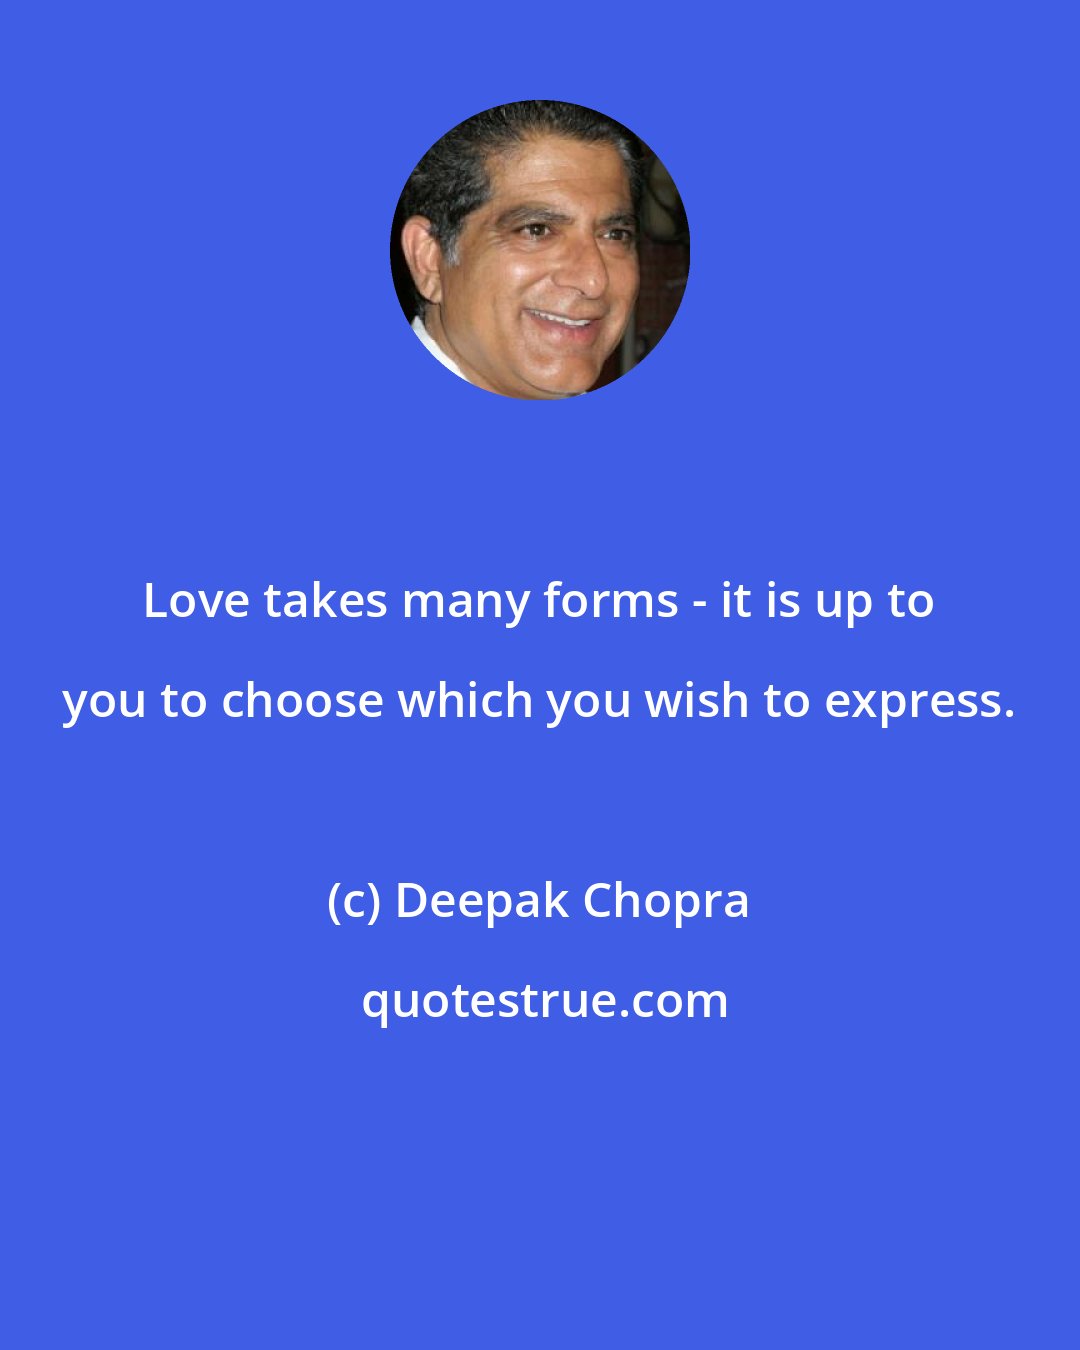 Deepak Chopra: Love takes many forms - it is up to you to choose which you wish to express.